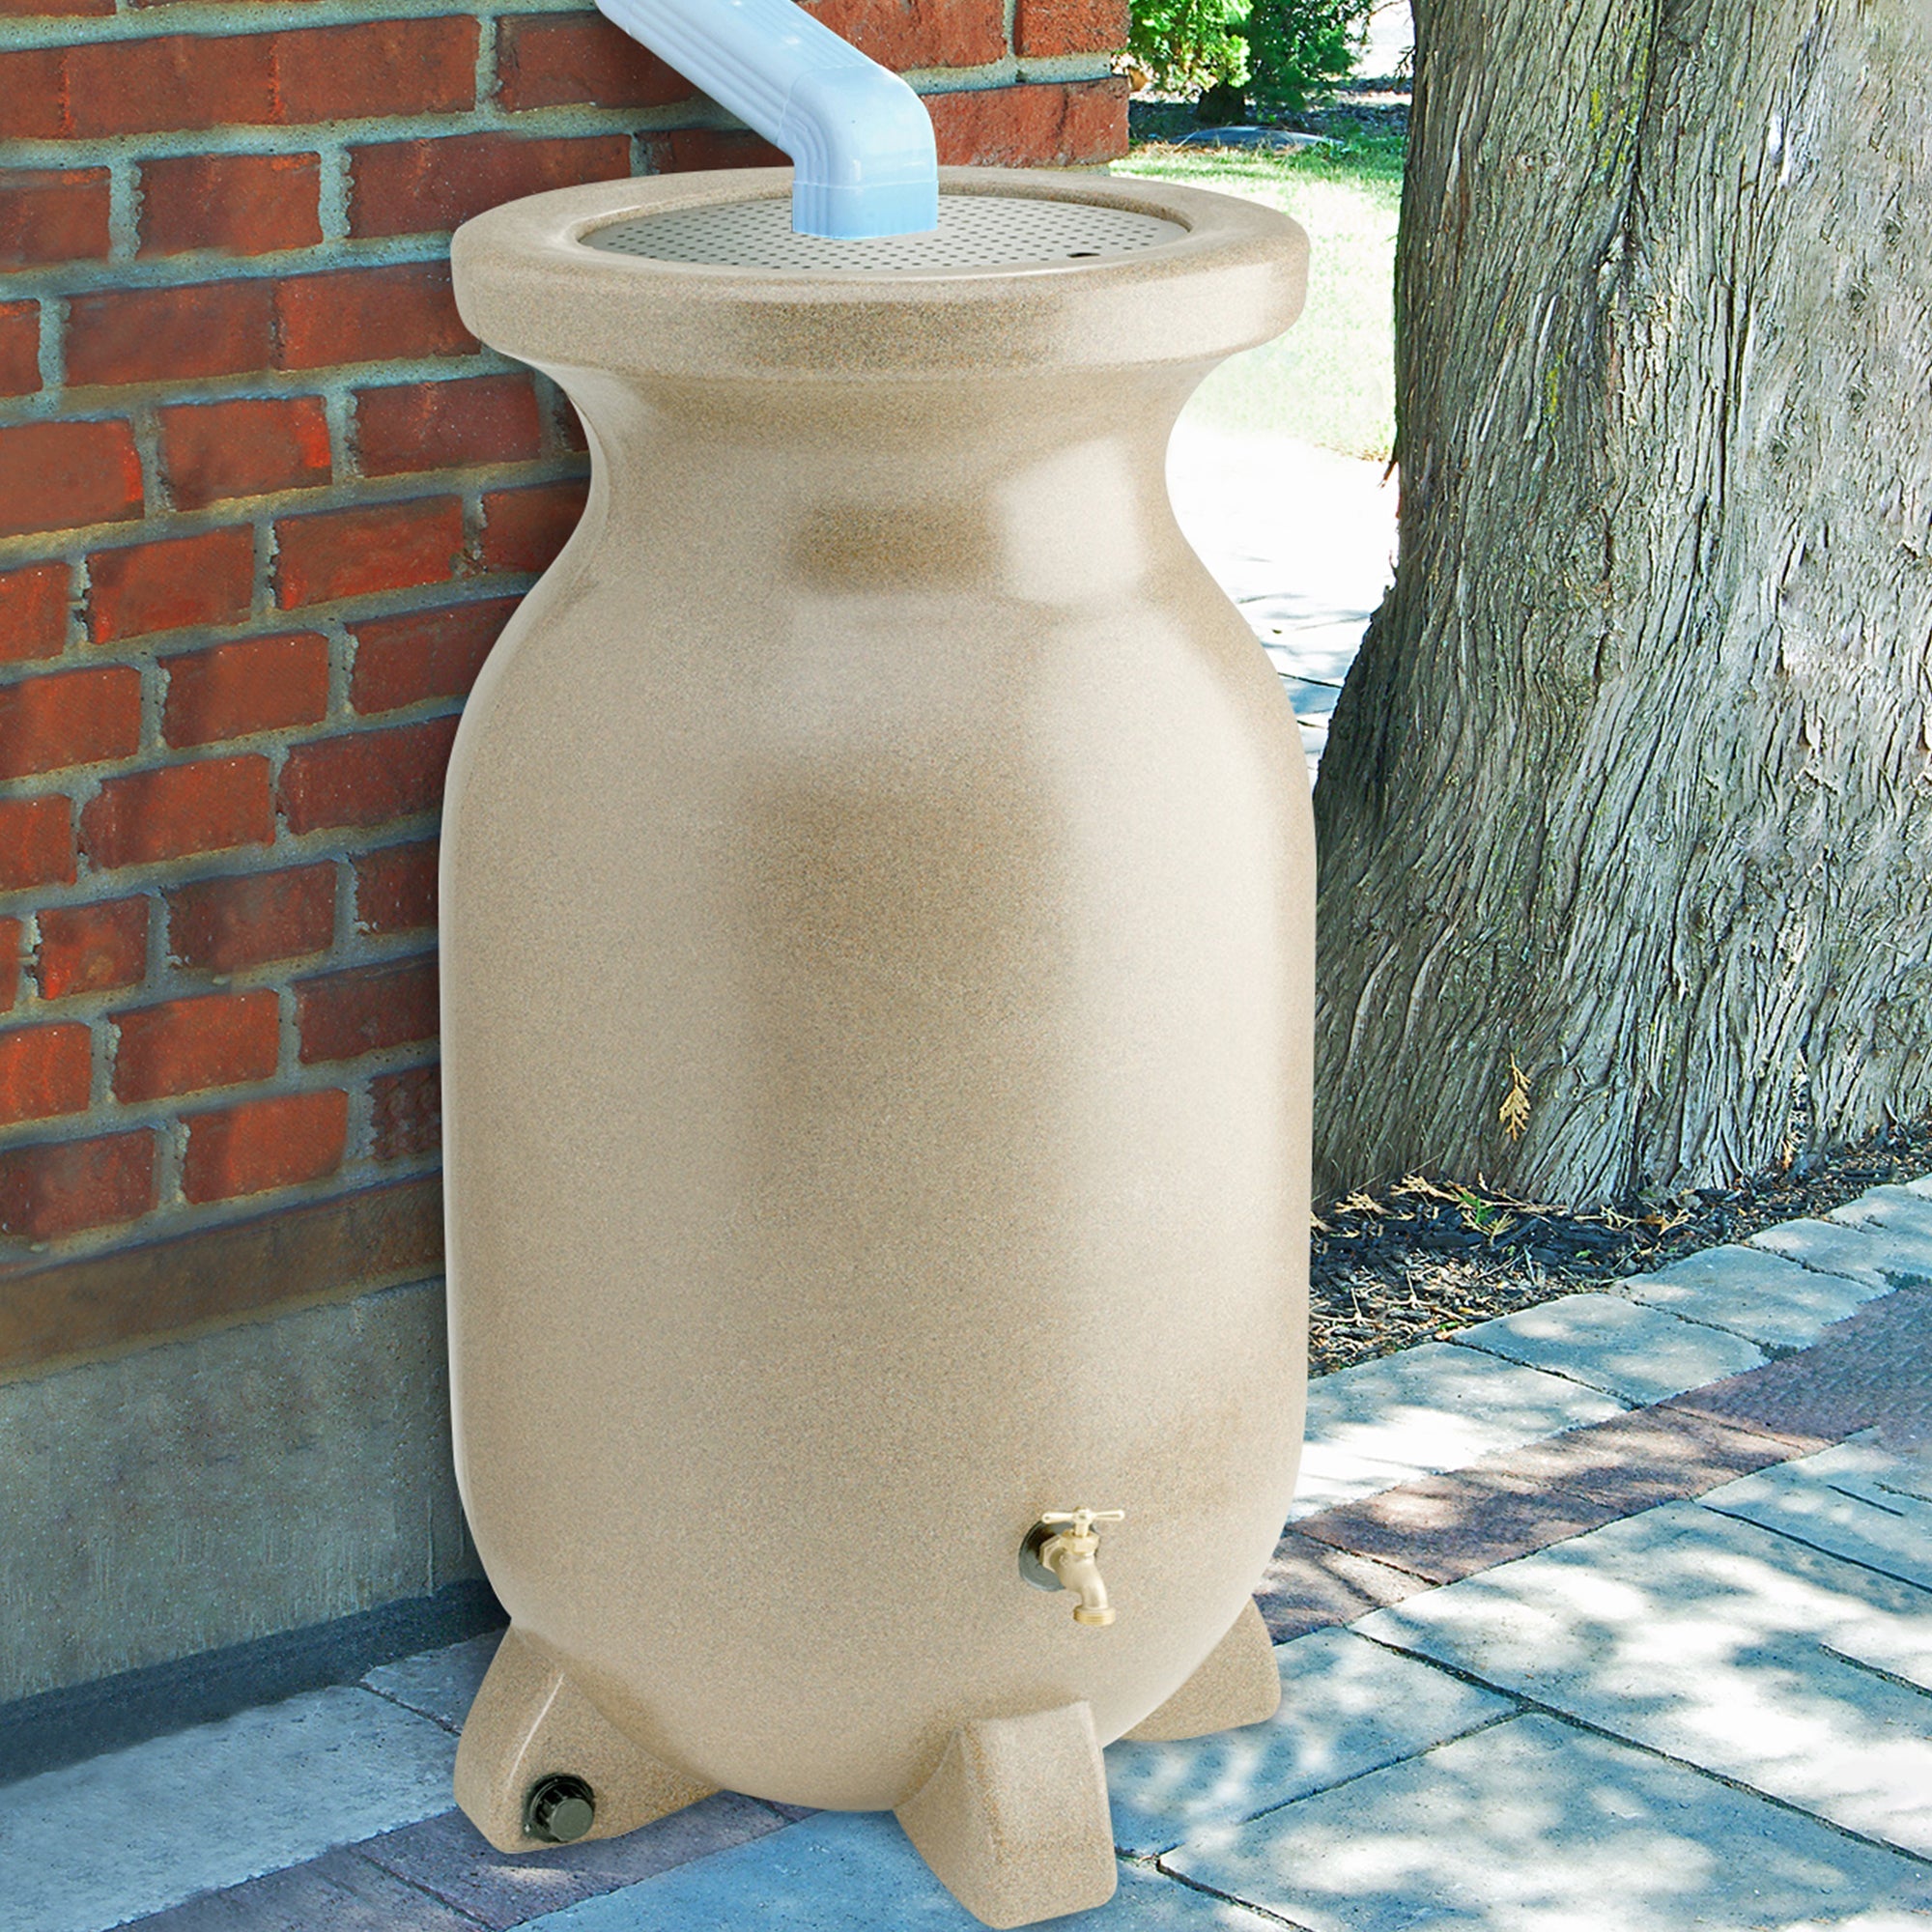 Lifestyle image of rain barrel set up on a brick pathway under a white downspout with a red brick wall and a tree in the background